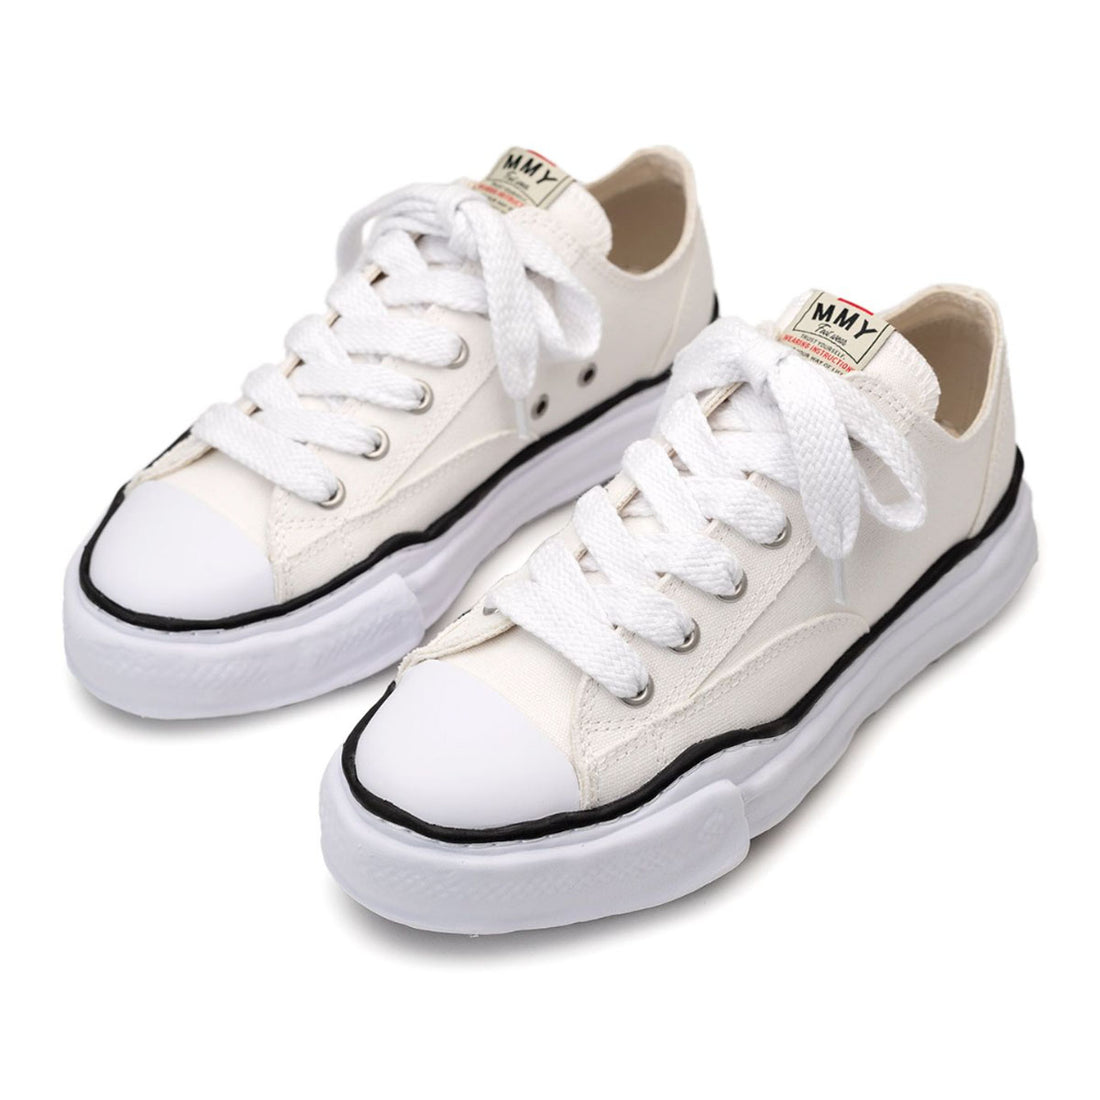 [MAISON MIHARA YASUHIRO]"PETERSON" OG Sole Canvas Low-top Sneaker/WHITE(A01FW702)